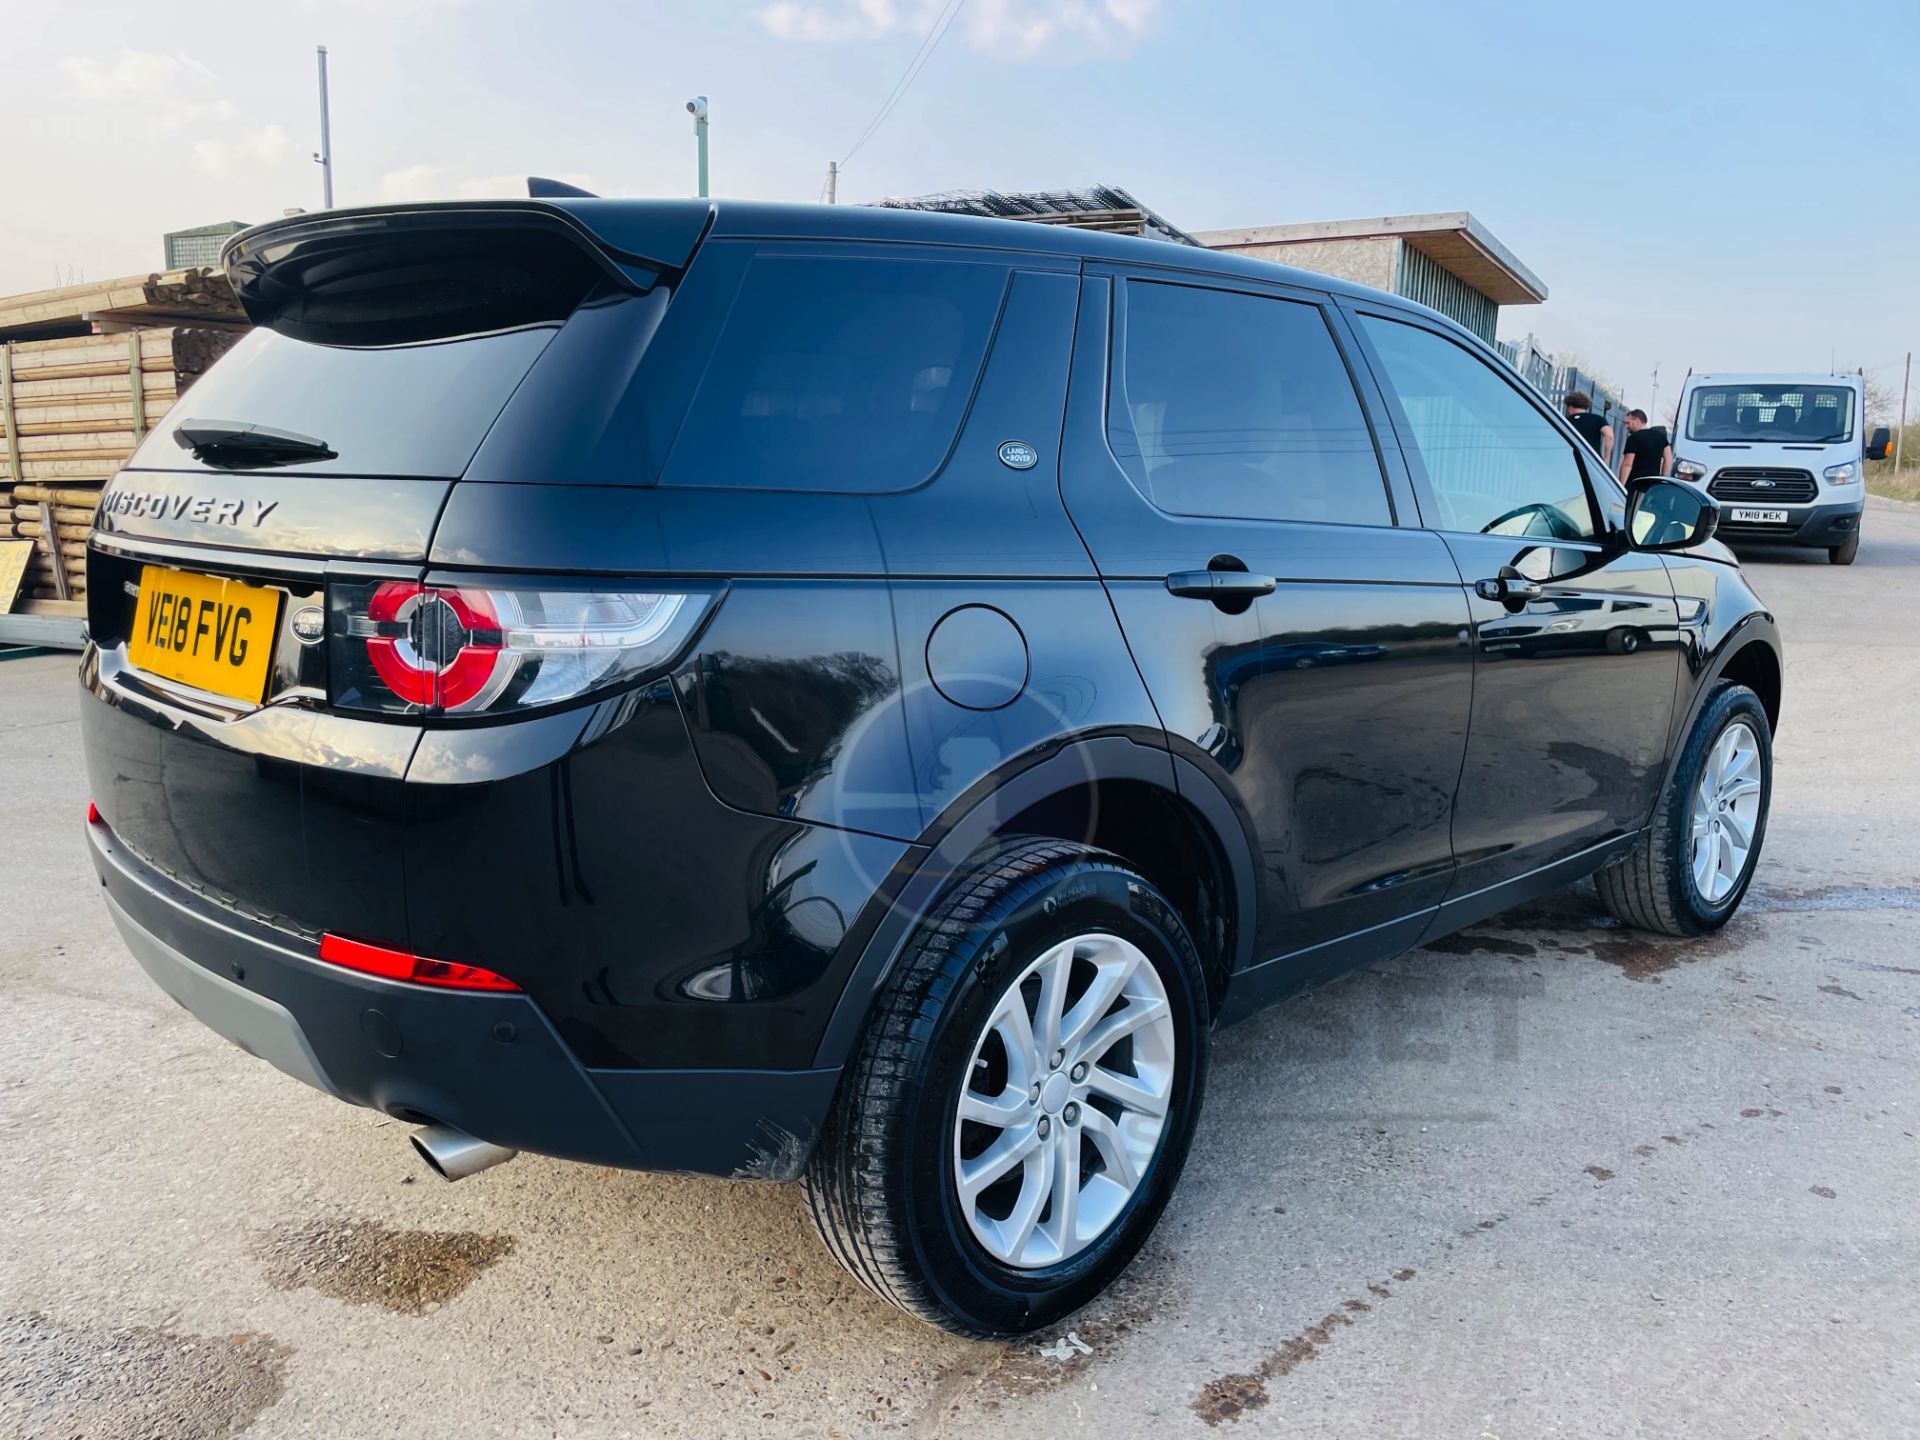 (On Sale) LAND ROVER DISCOVERY SPORT *SE TECH* 7 SEATER SUV (2018 - EURO 6) TD4 - AUTO *LOW MILEAGE* - Image 11 of 35